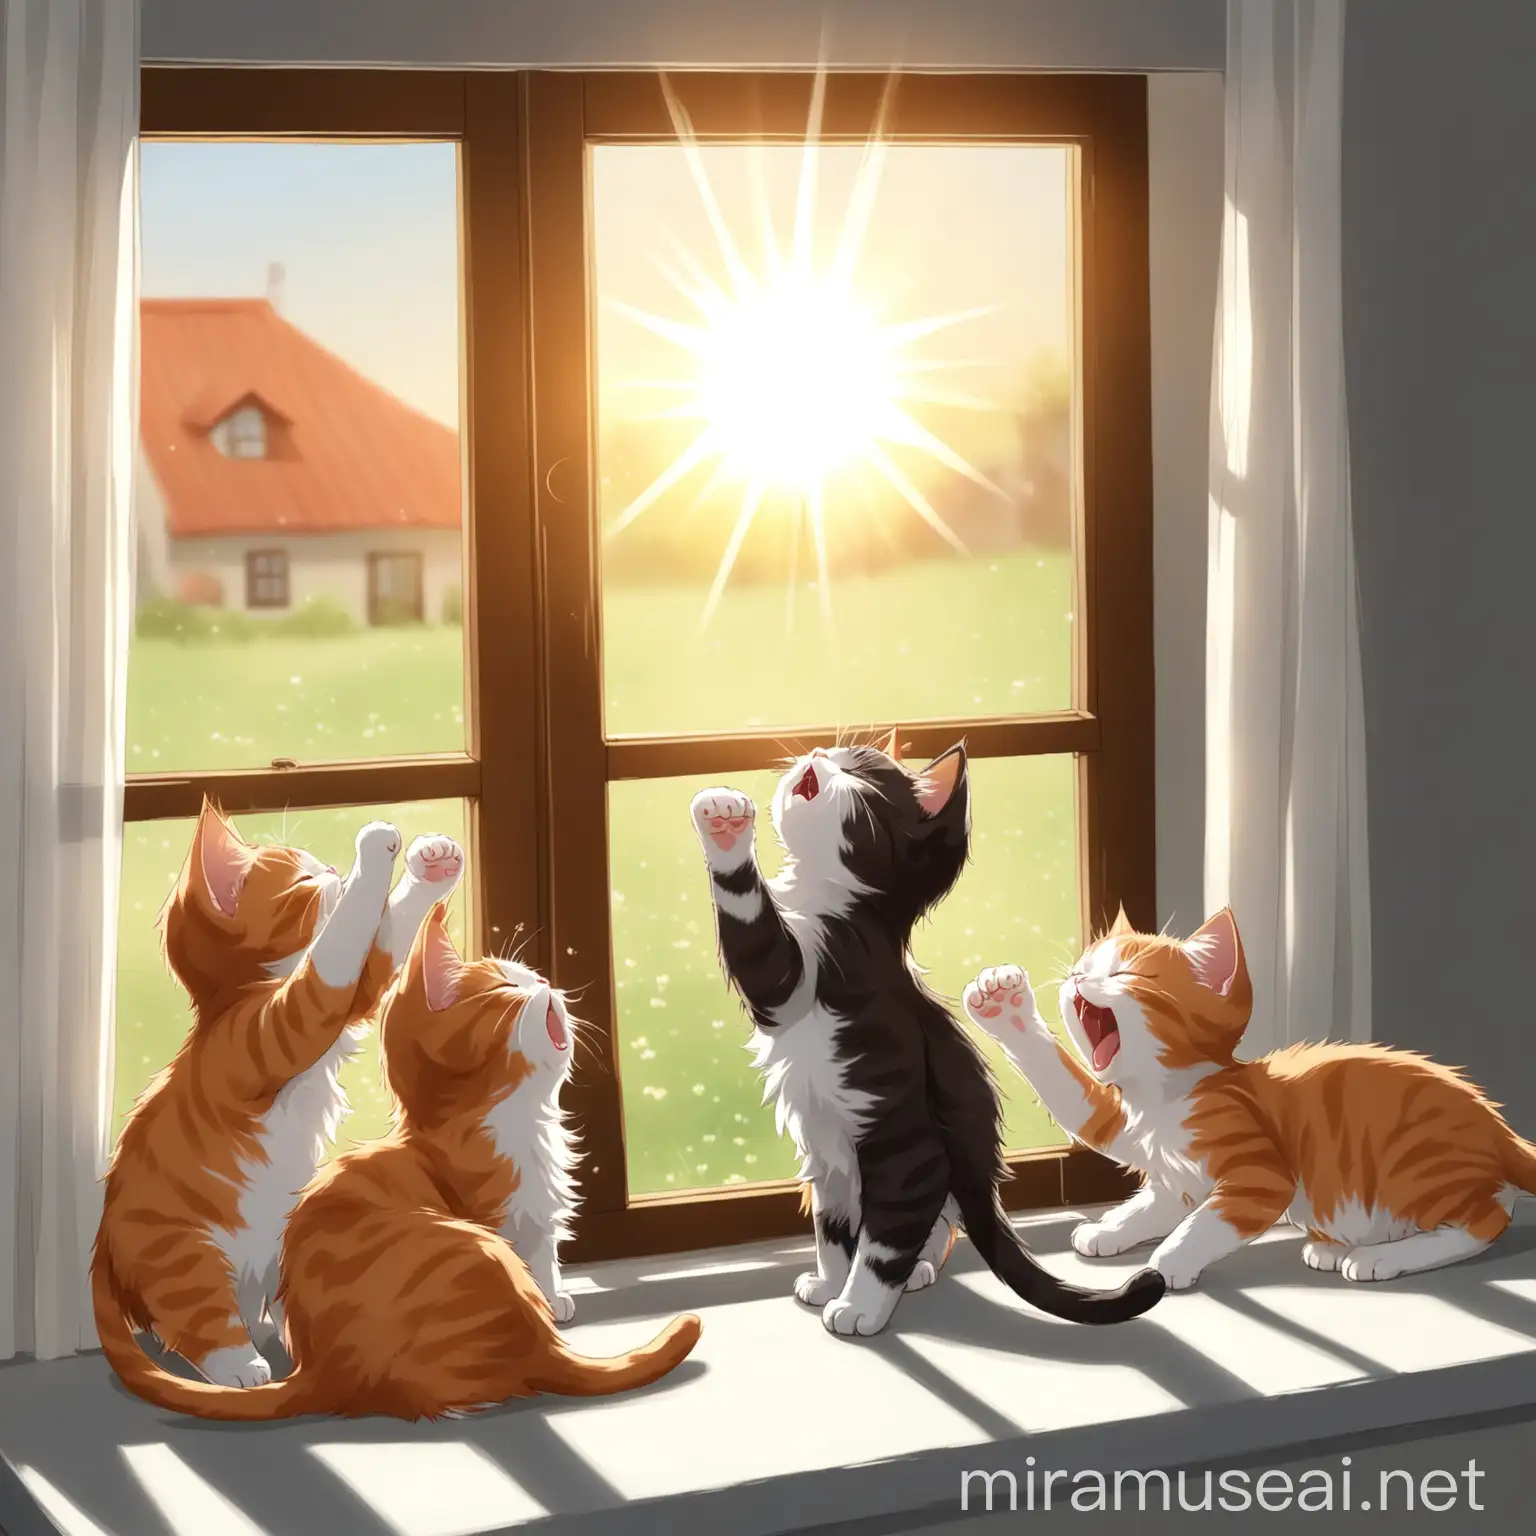 Adorable Kittens Stretching and Yawning in Morning Sunlight